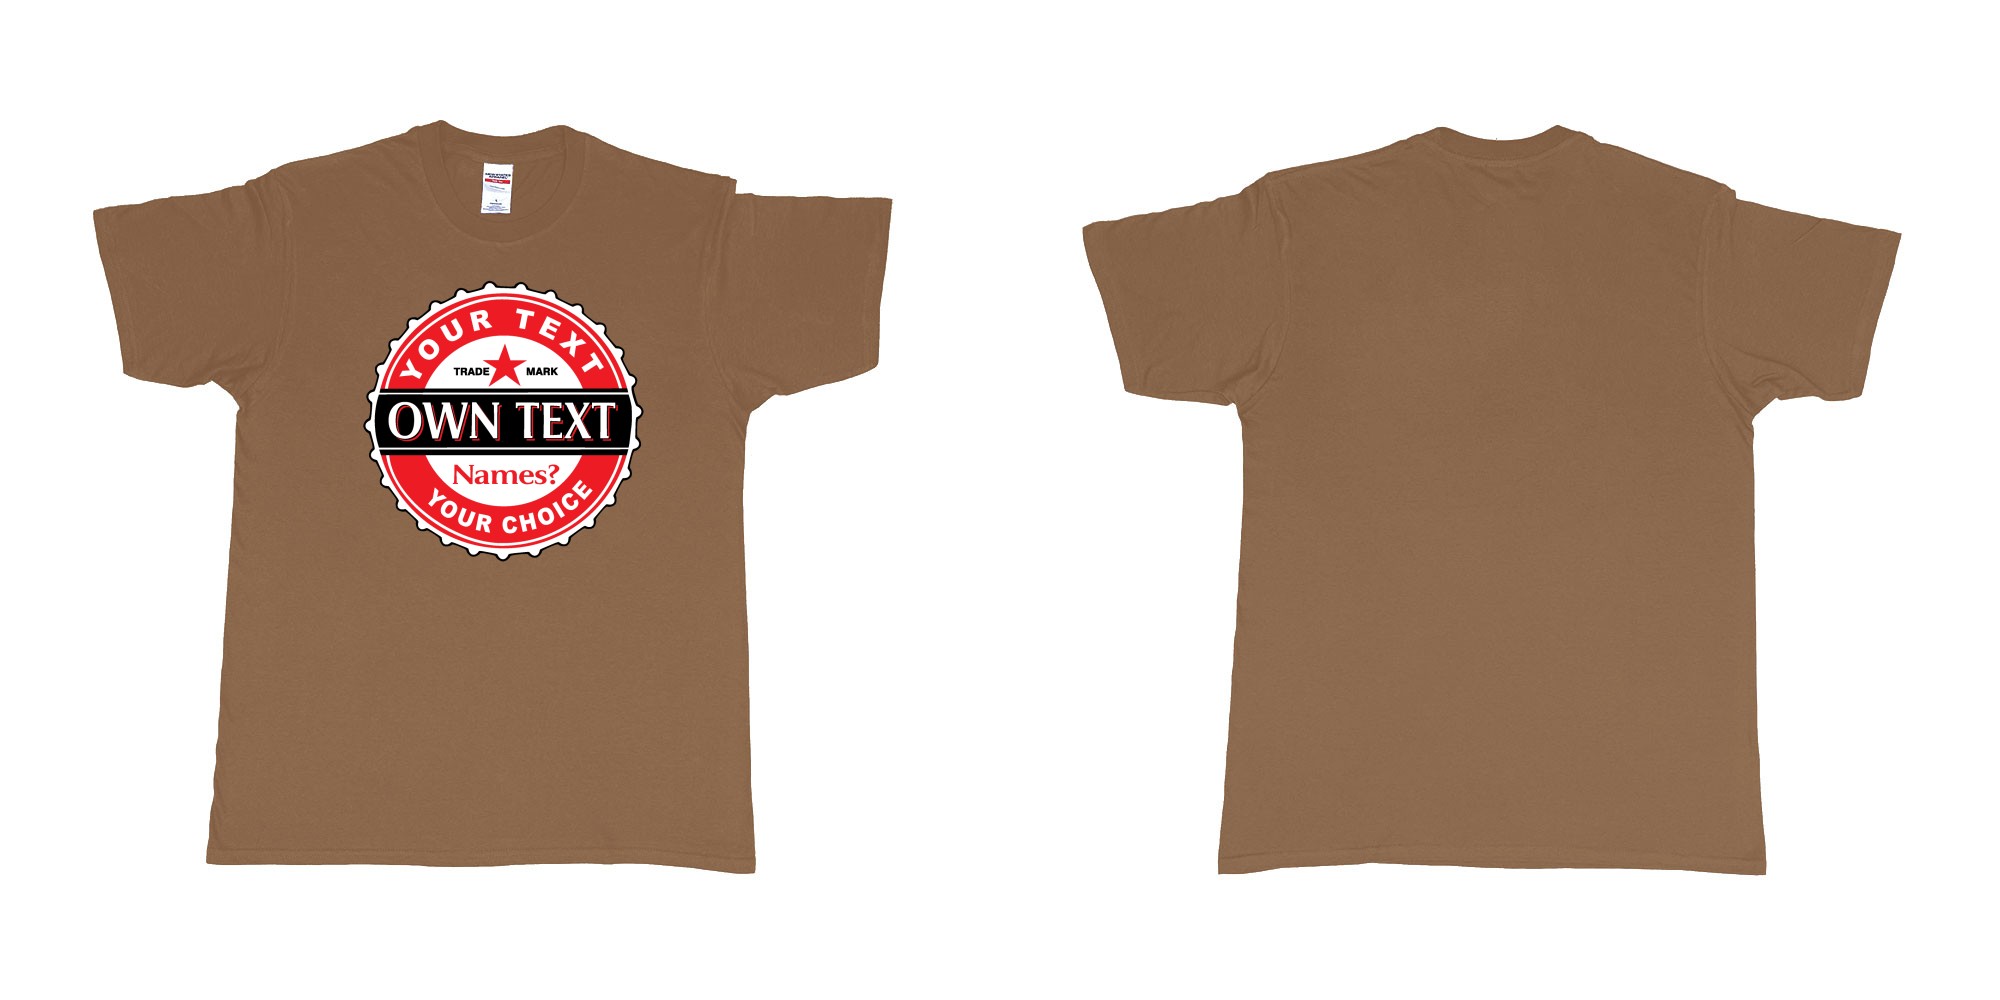 Custom tshirt design bintang classic strait in fabric color chestnut choice your own text made in Bali by The Pirate Way